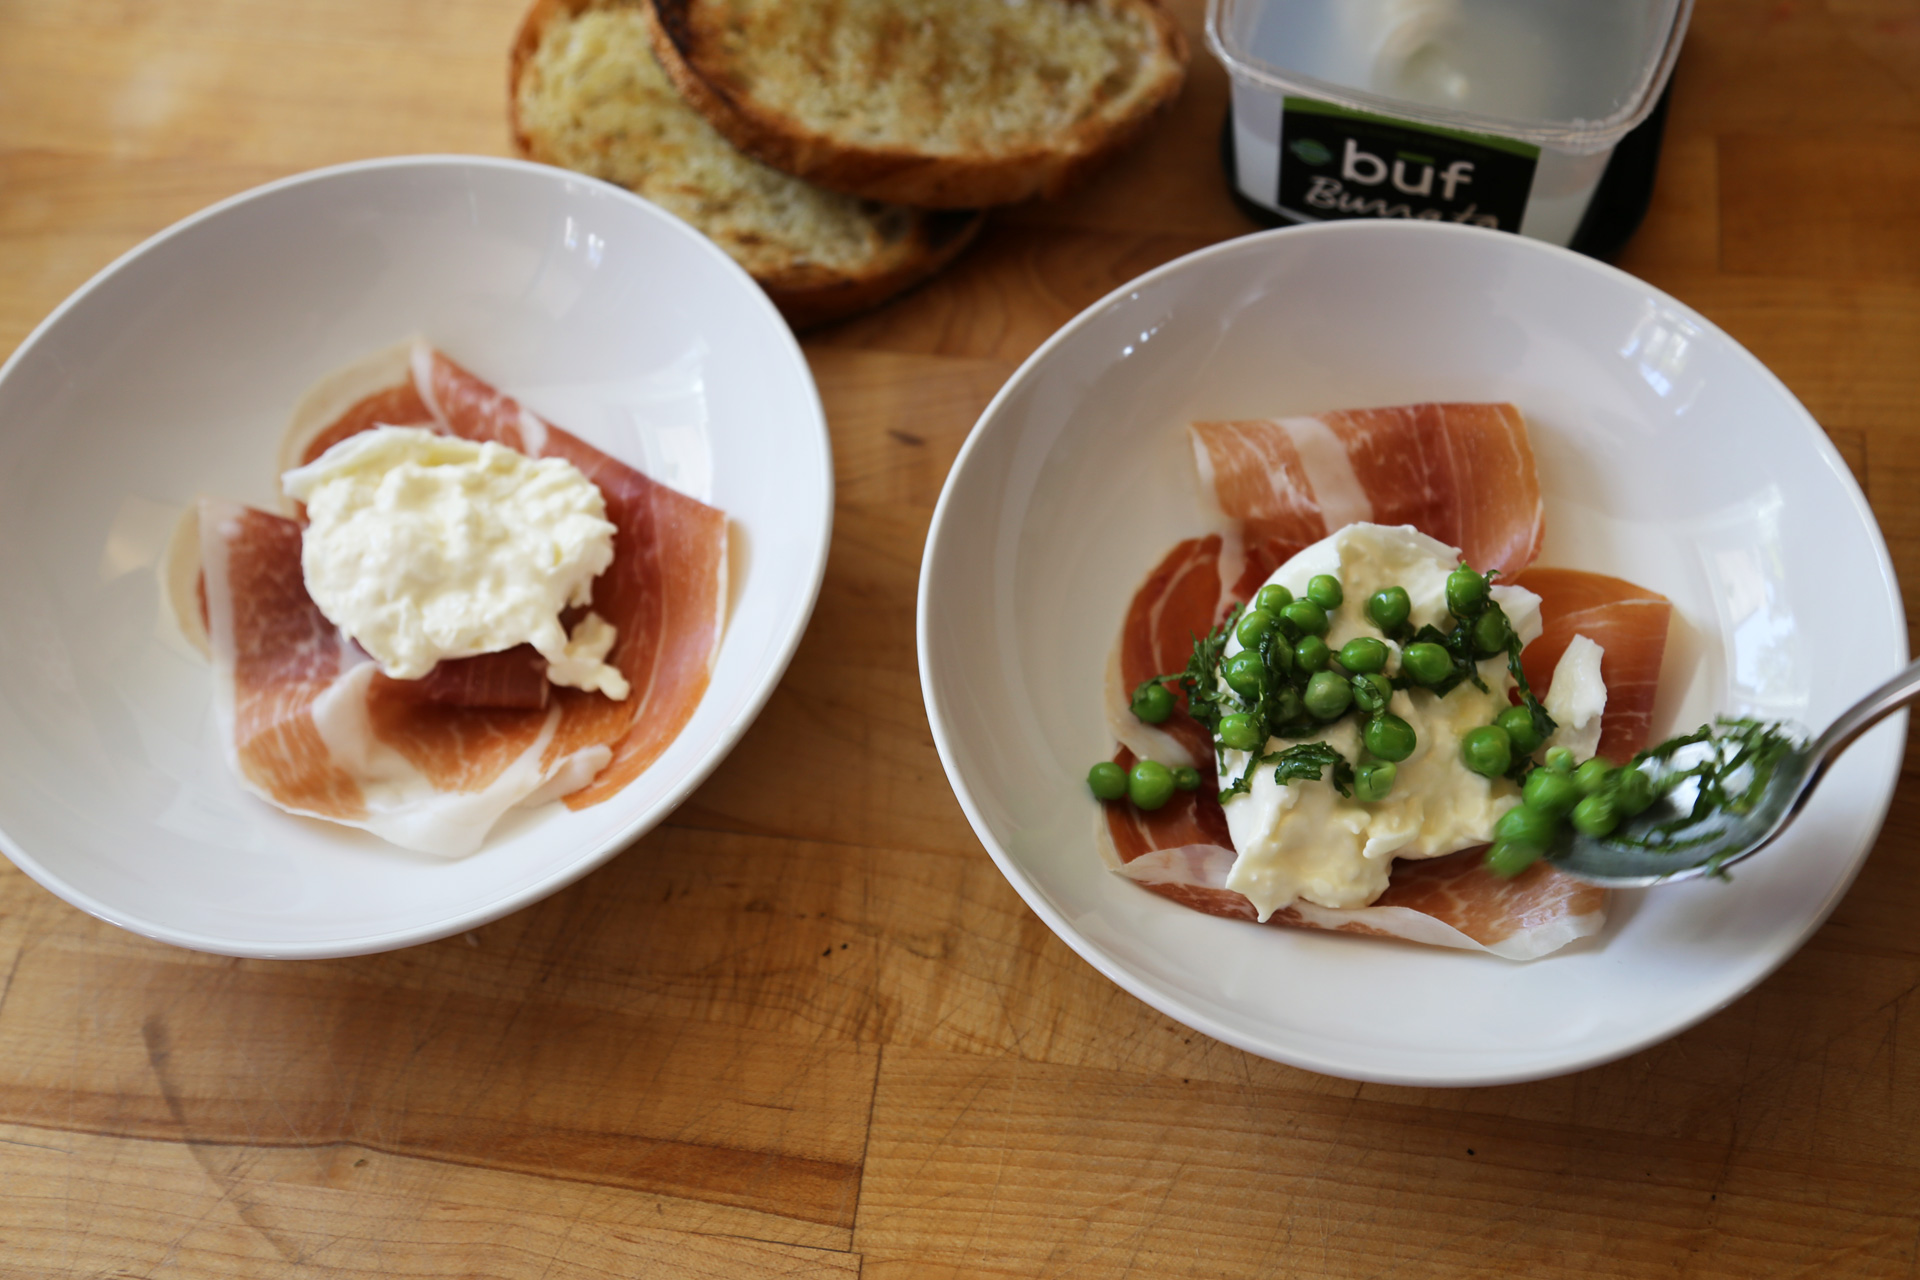 Top with a chunk of burrata. Spoon the pea mixture over the burrata, dividing it evenly.